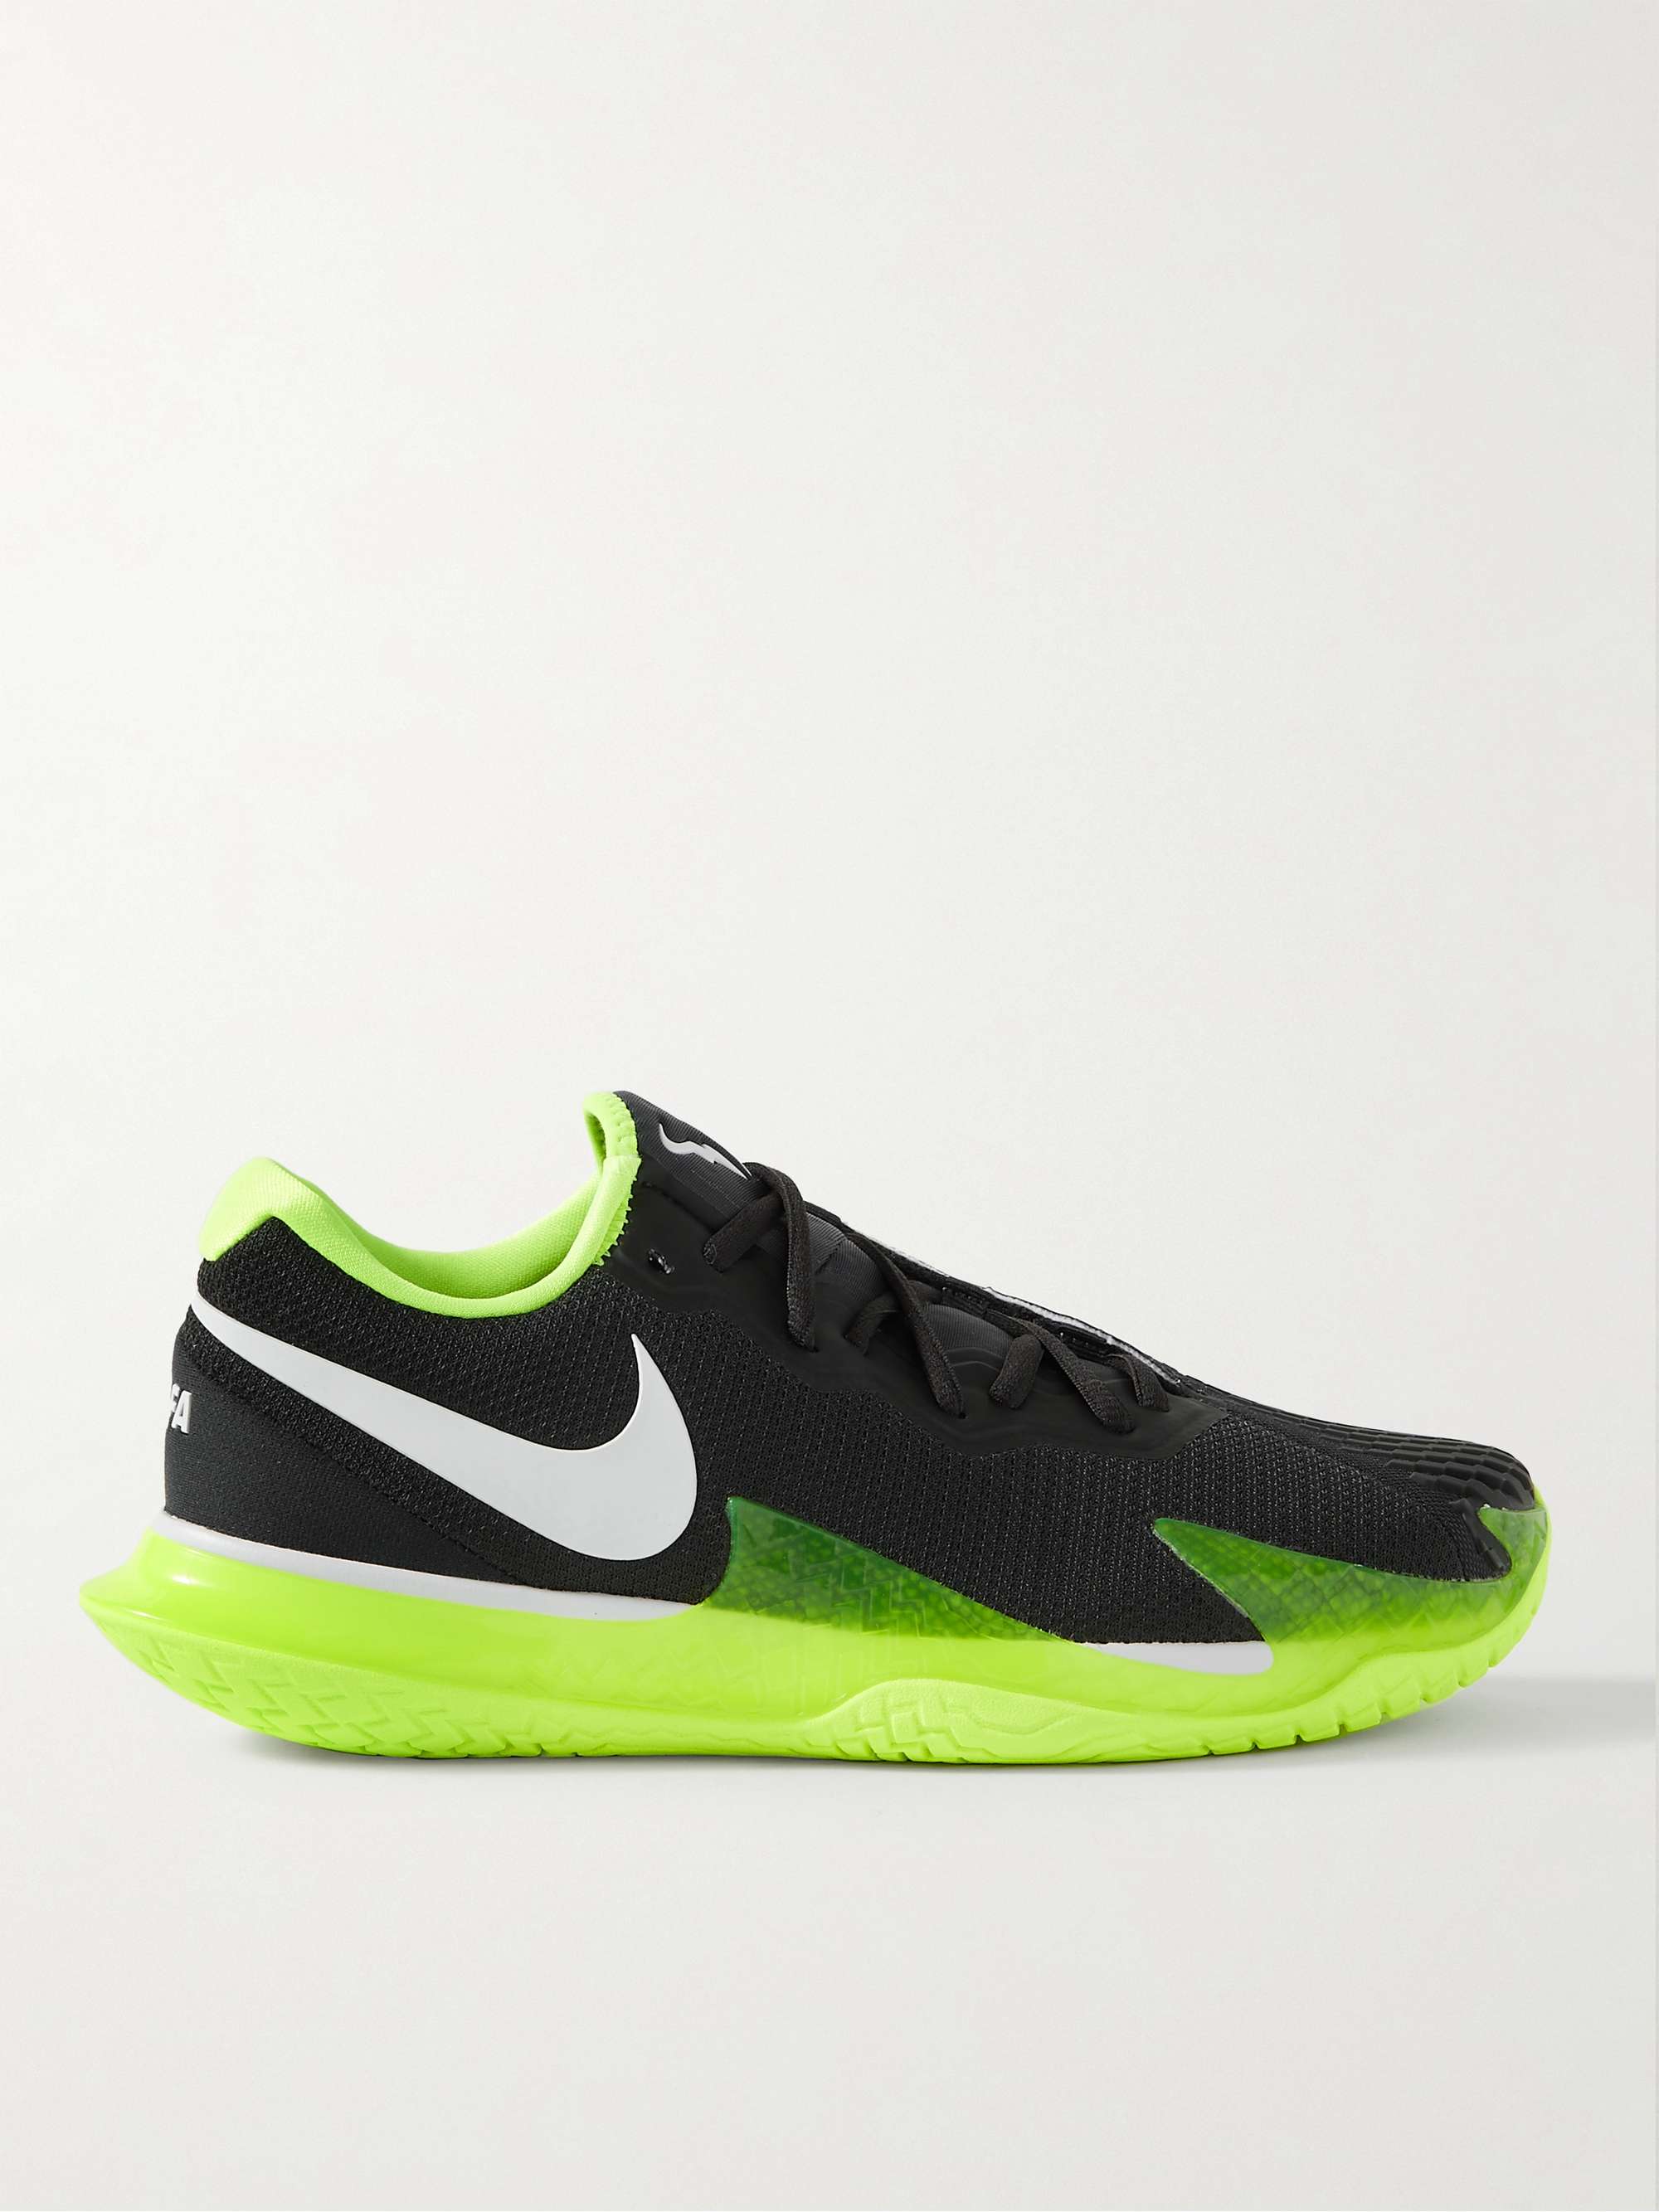 NIKE TENNIS NikeCourt Air Zoom Vapor Cage 4 Rubber and Mesh Tennis Sneakers  | MR PORTER